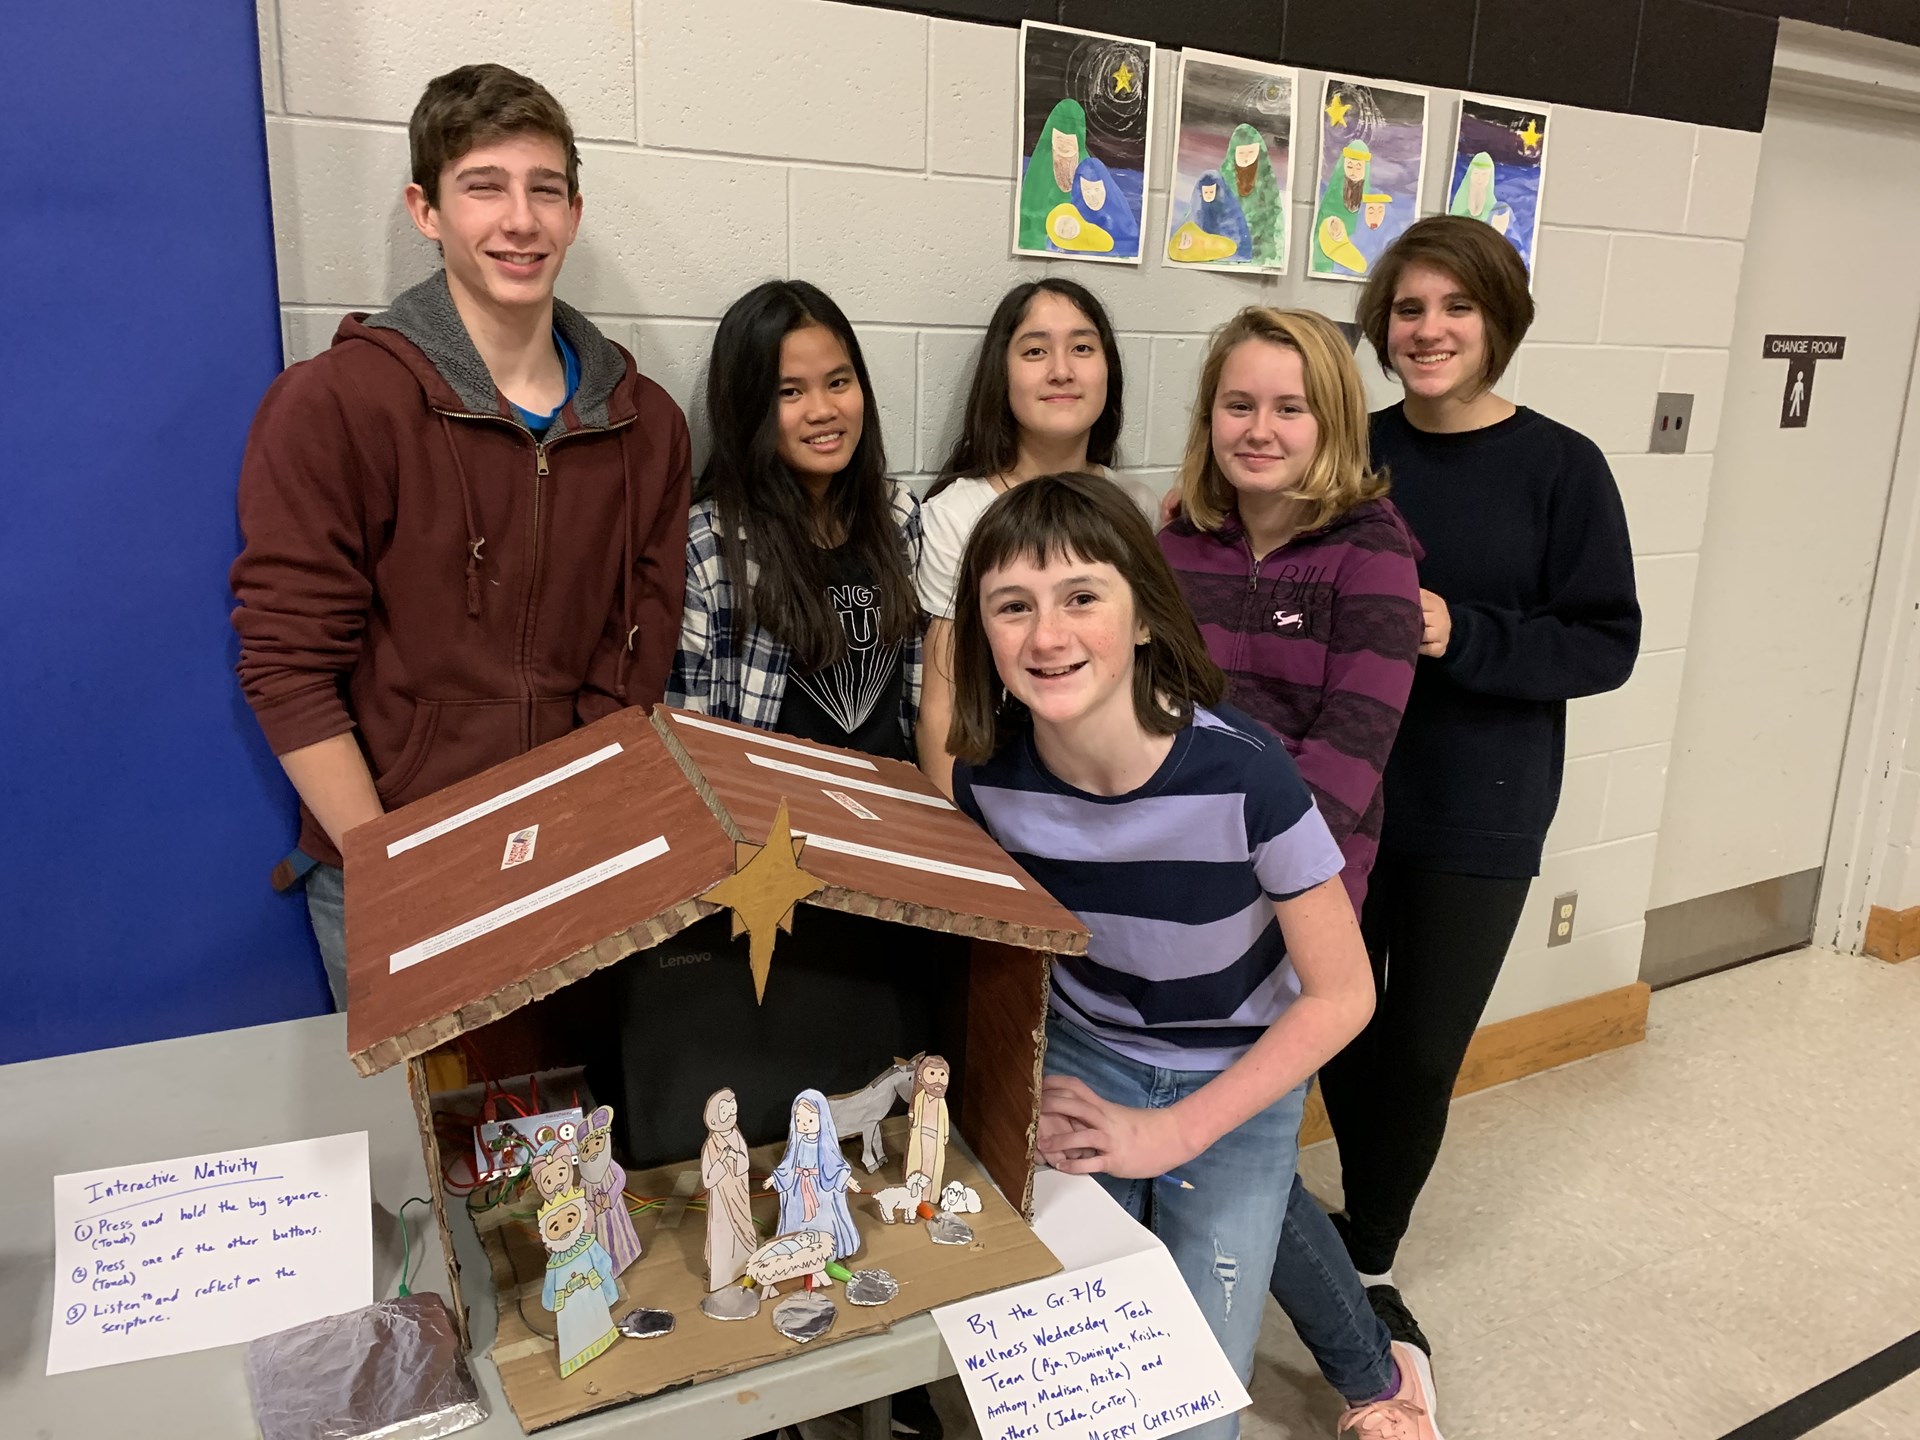 Students in front of their interactive Nativity scene.